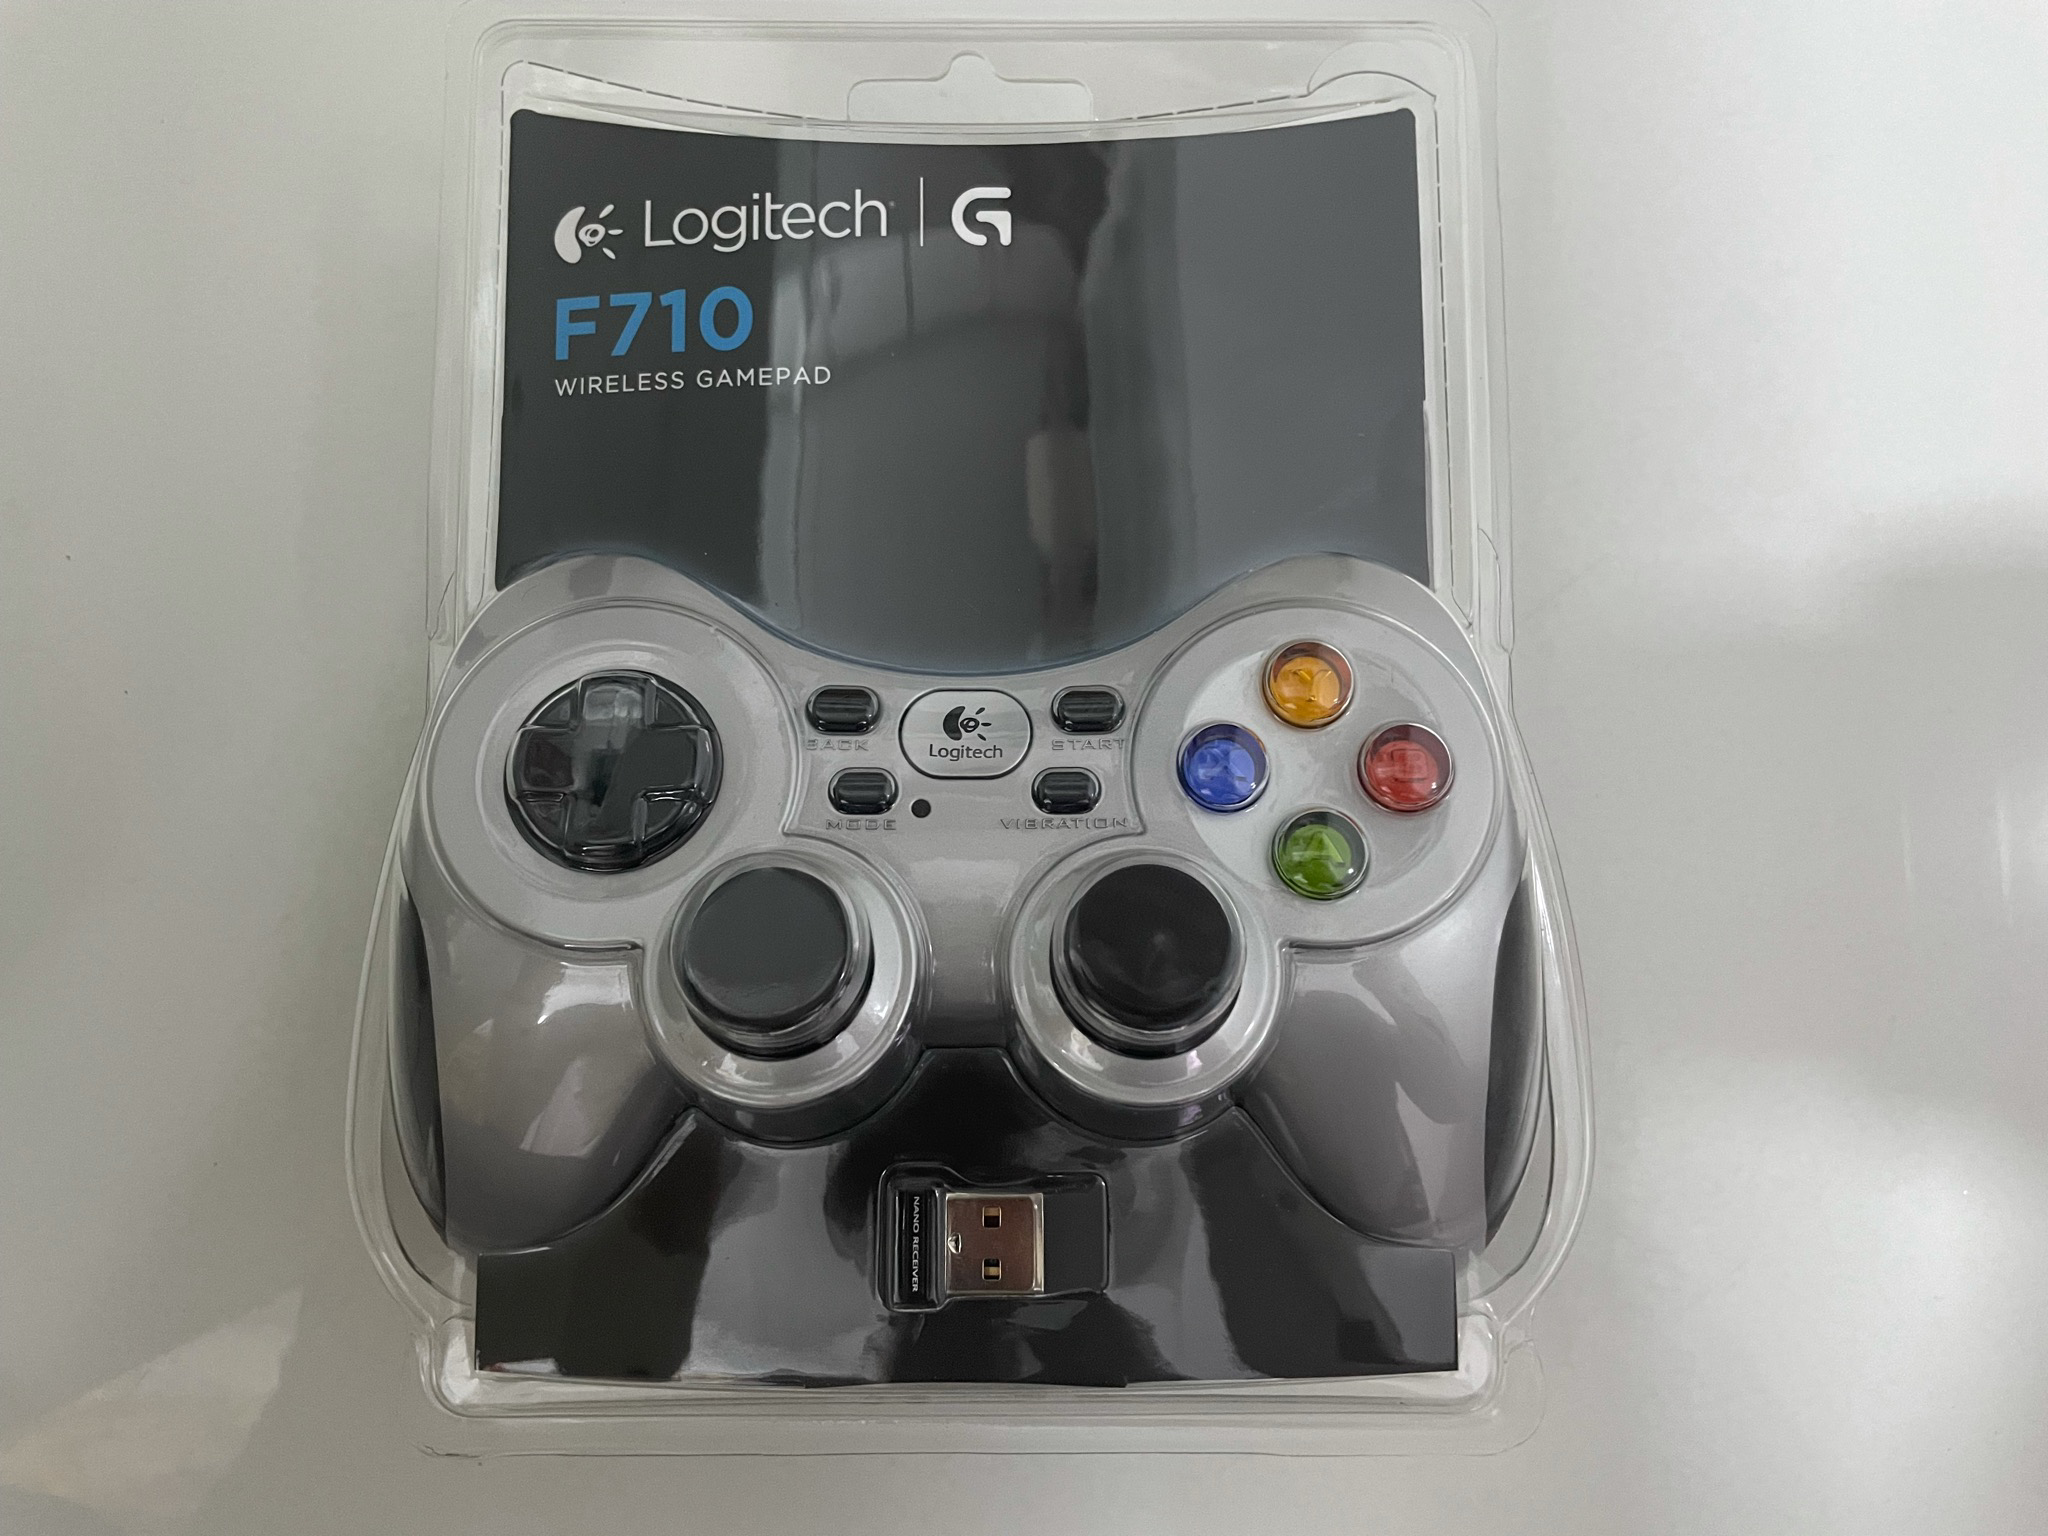 Logitech F710 Bluetooth Wireless Gamepad – Rs.2890 – LT Online Store – Call  022-6631 5555 (Mon to Sat) 10am to 9pm